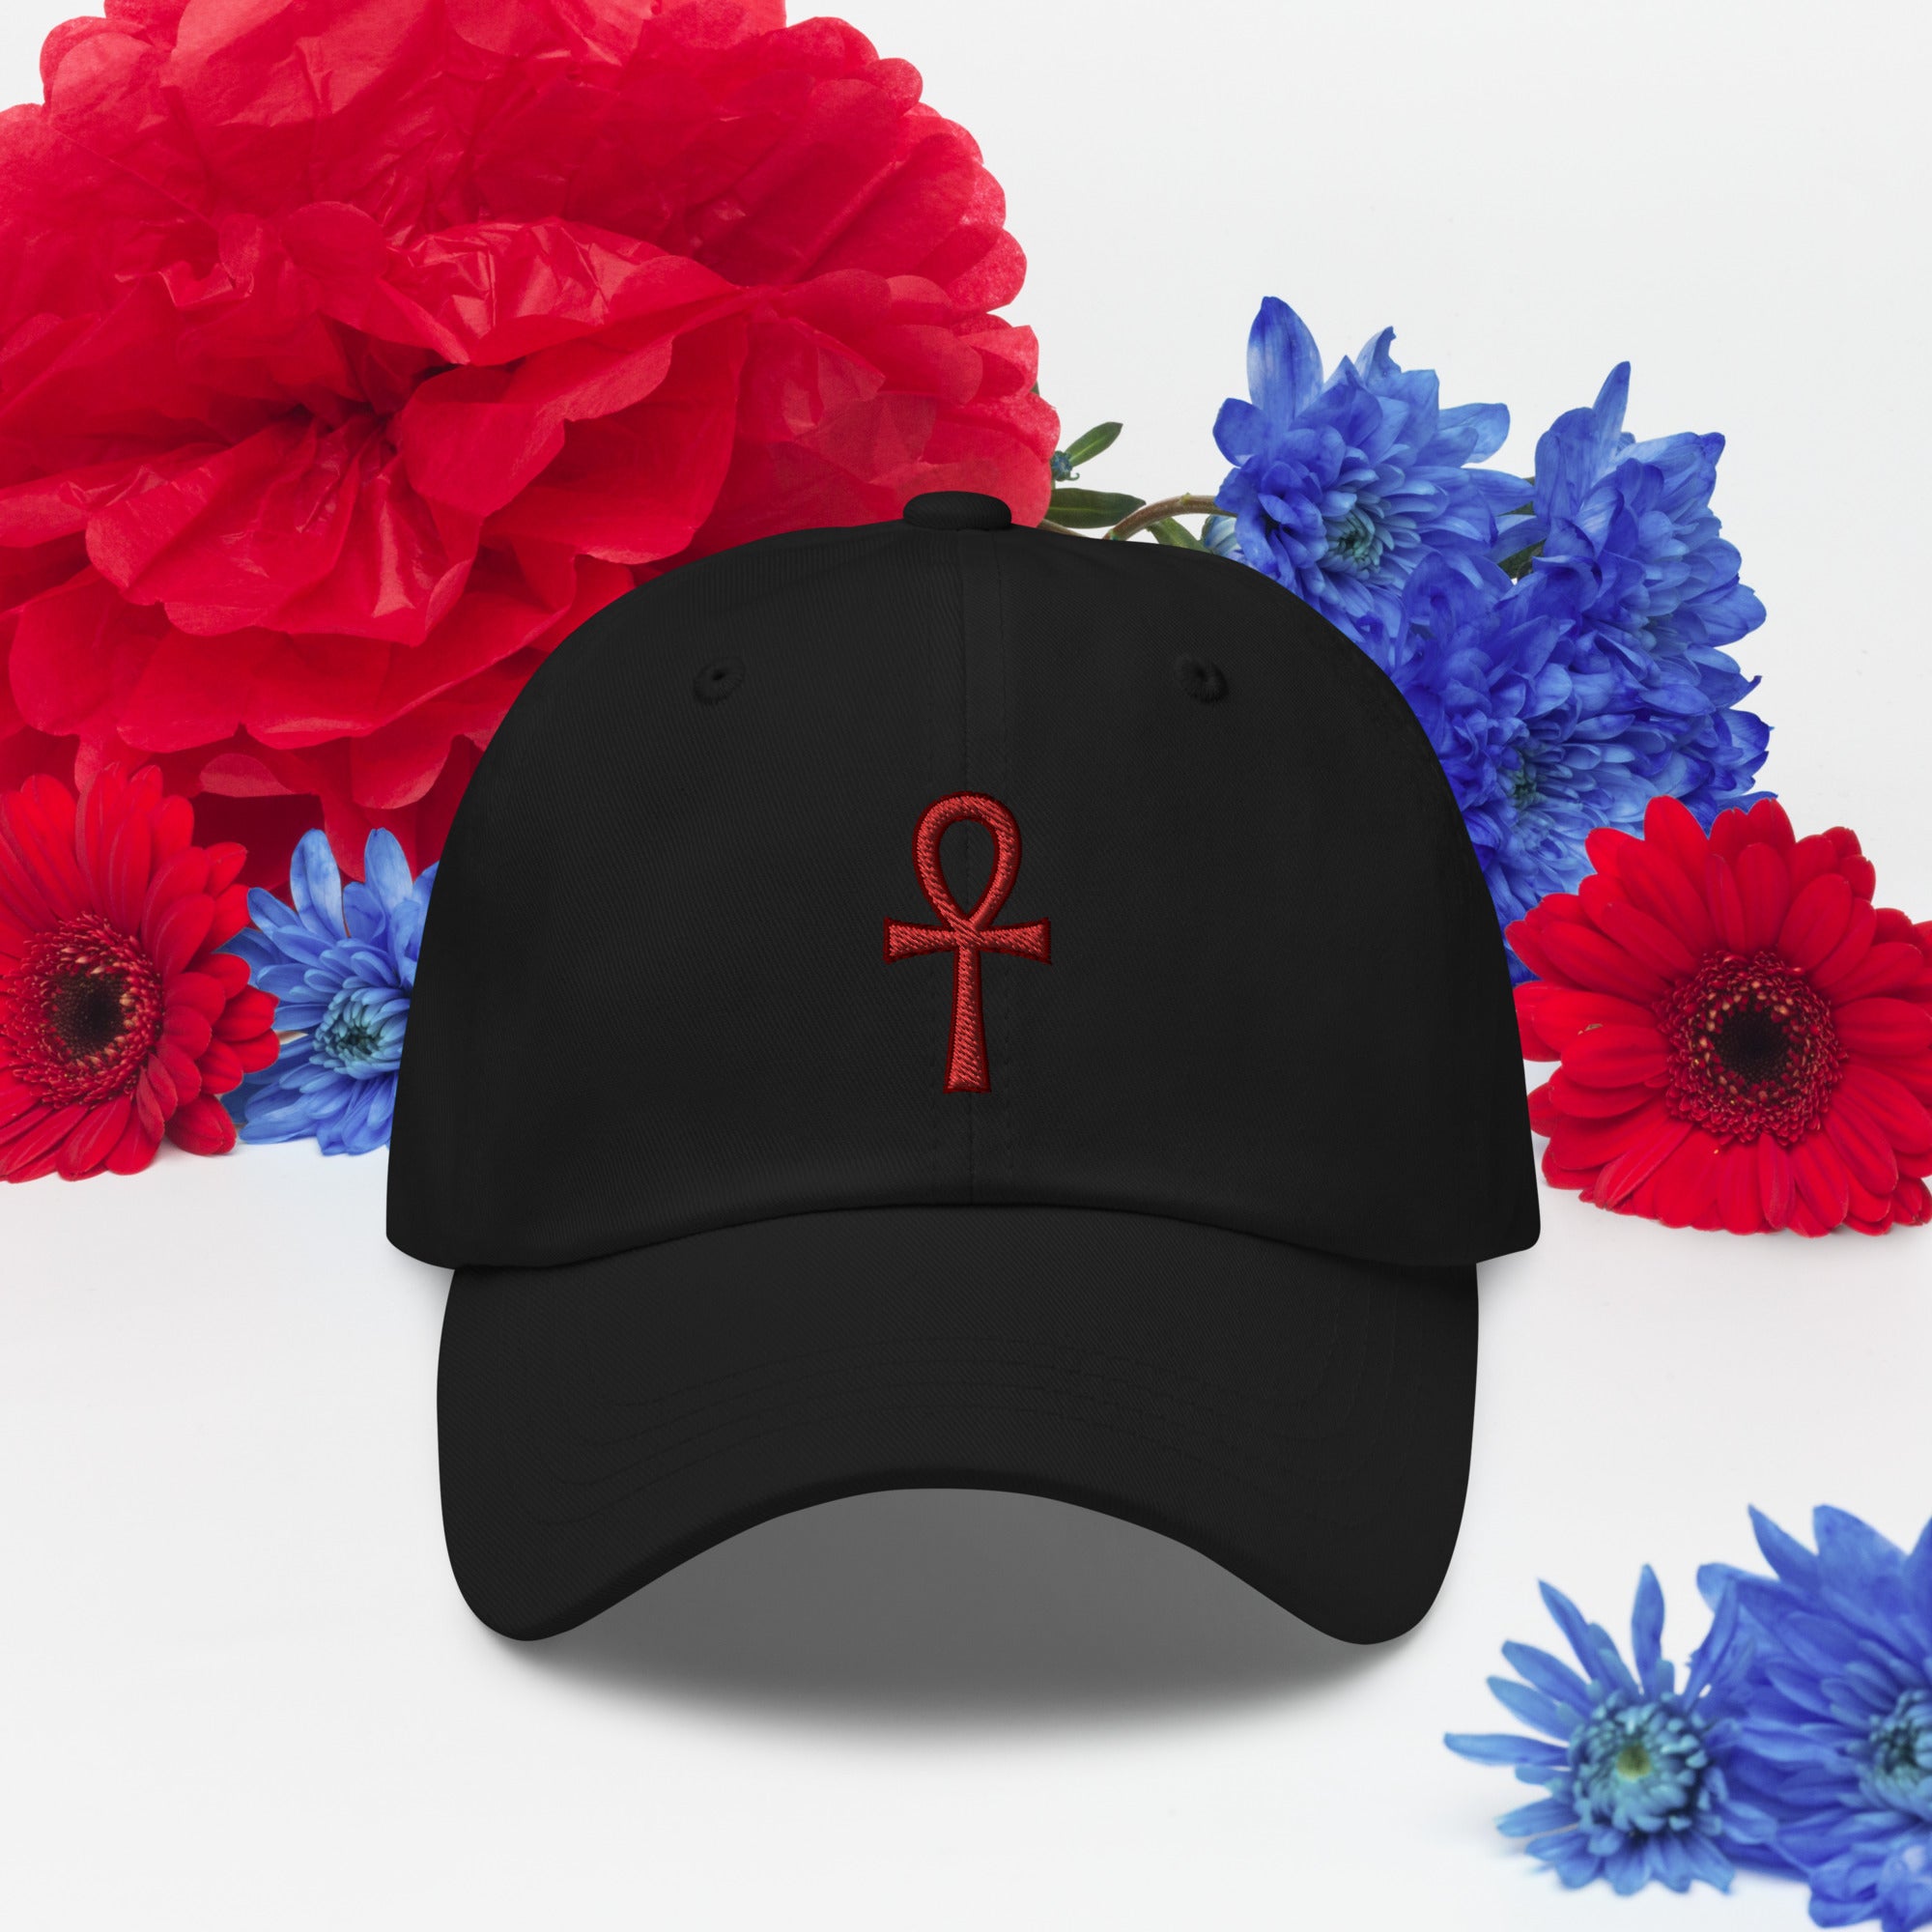 The Key of Life Ankh Ancient Egyptian Culture Embroidered Baseball Cap Dad hat Red Thread - Edge of Life Designs